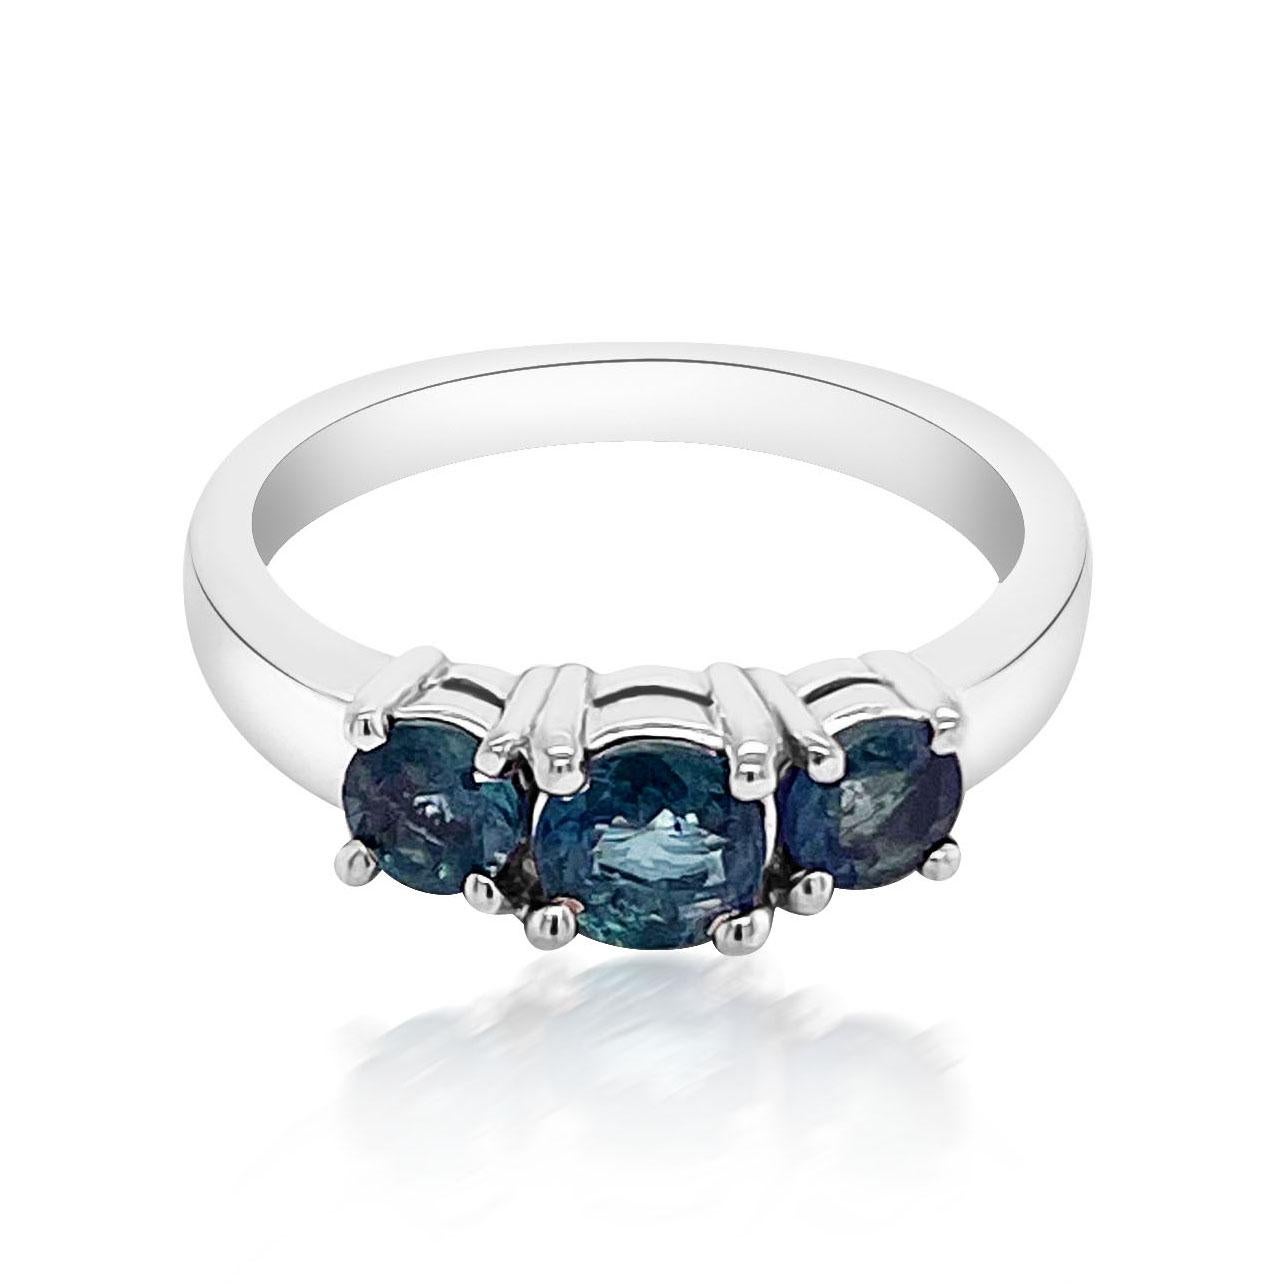 14K WHITE GOLD NATURAL ALEXANDRITE RING:4.01 GRAMS/ALEXANDRITE:1.30CT/#GVR1071 **This gorgeous 1.30ct Natural Alexandrite are gemstones of high wisdom and heart energy. Flanked by gleaming duo Round Cut Natural Alexandrite and crafted in 14K white